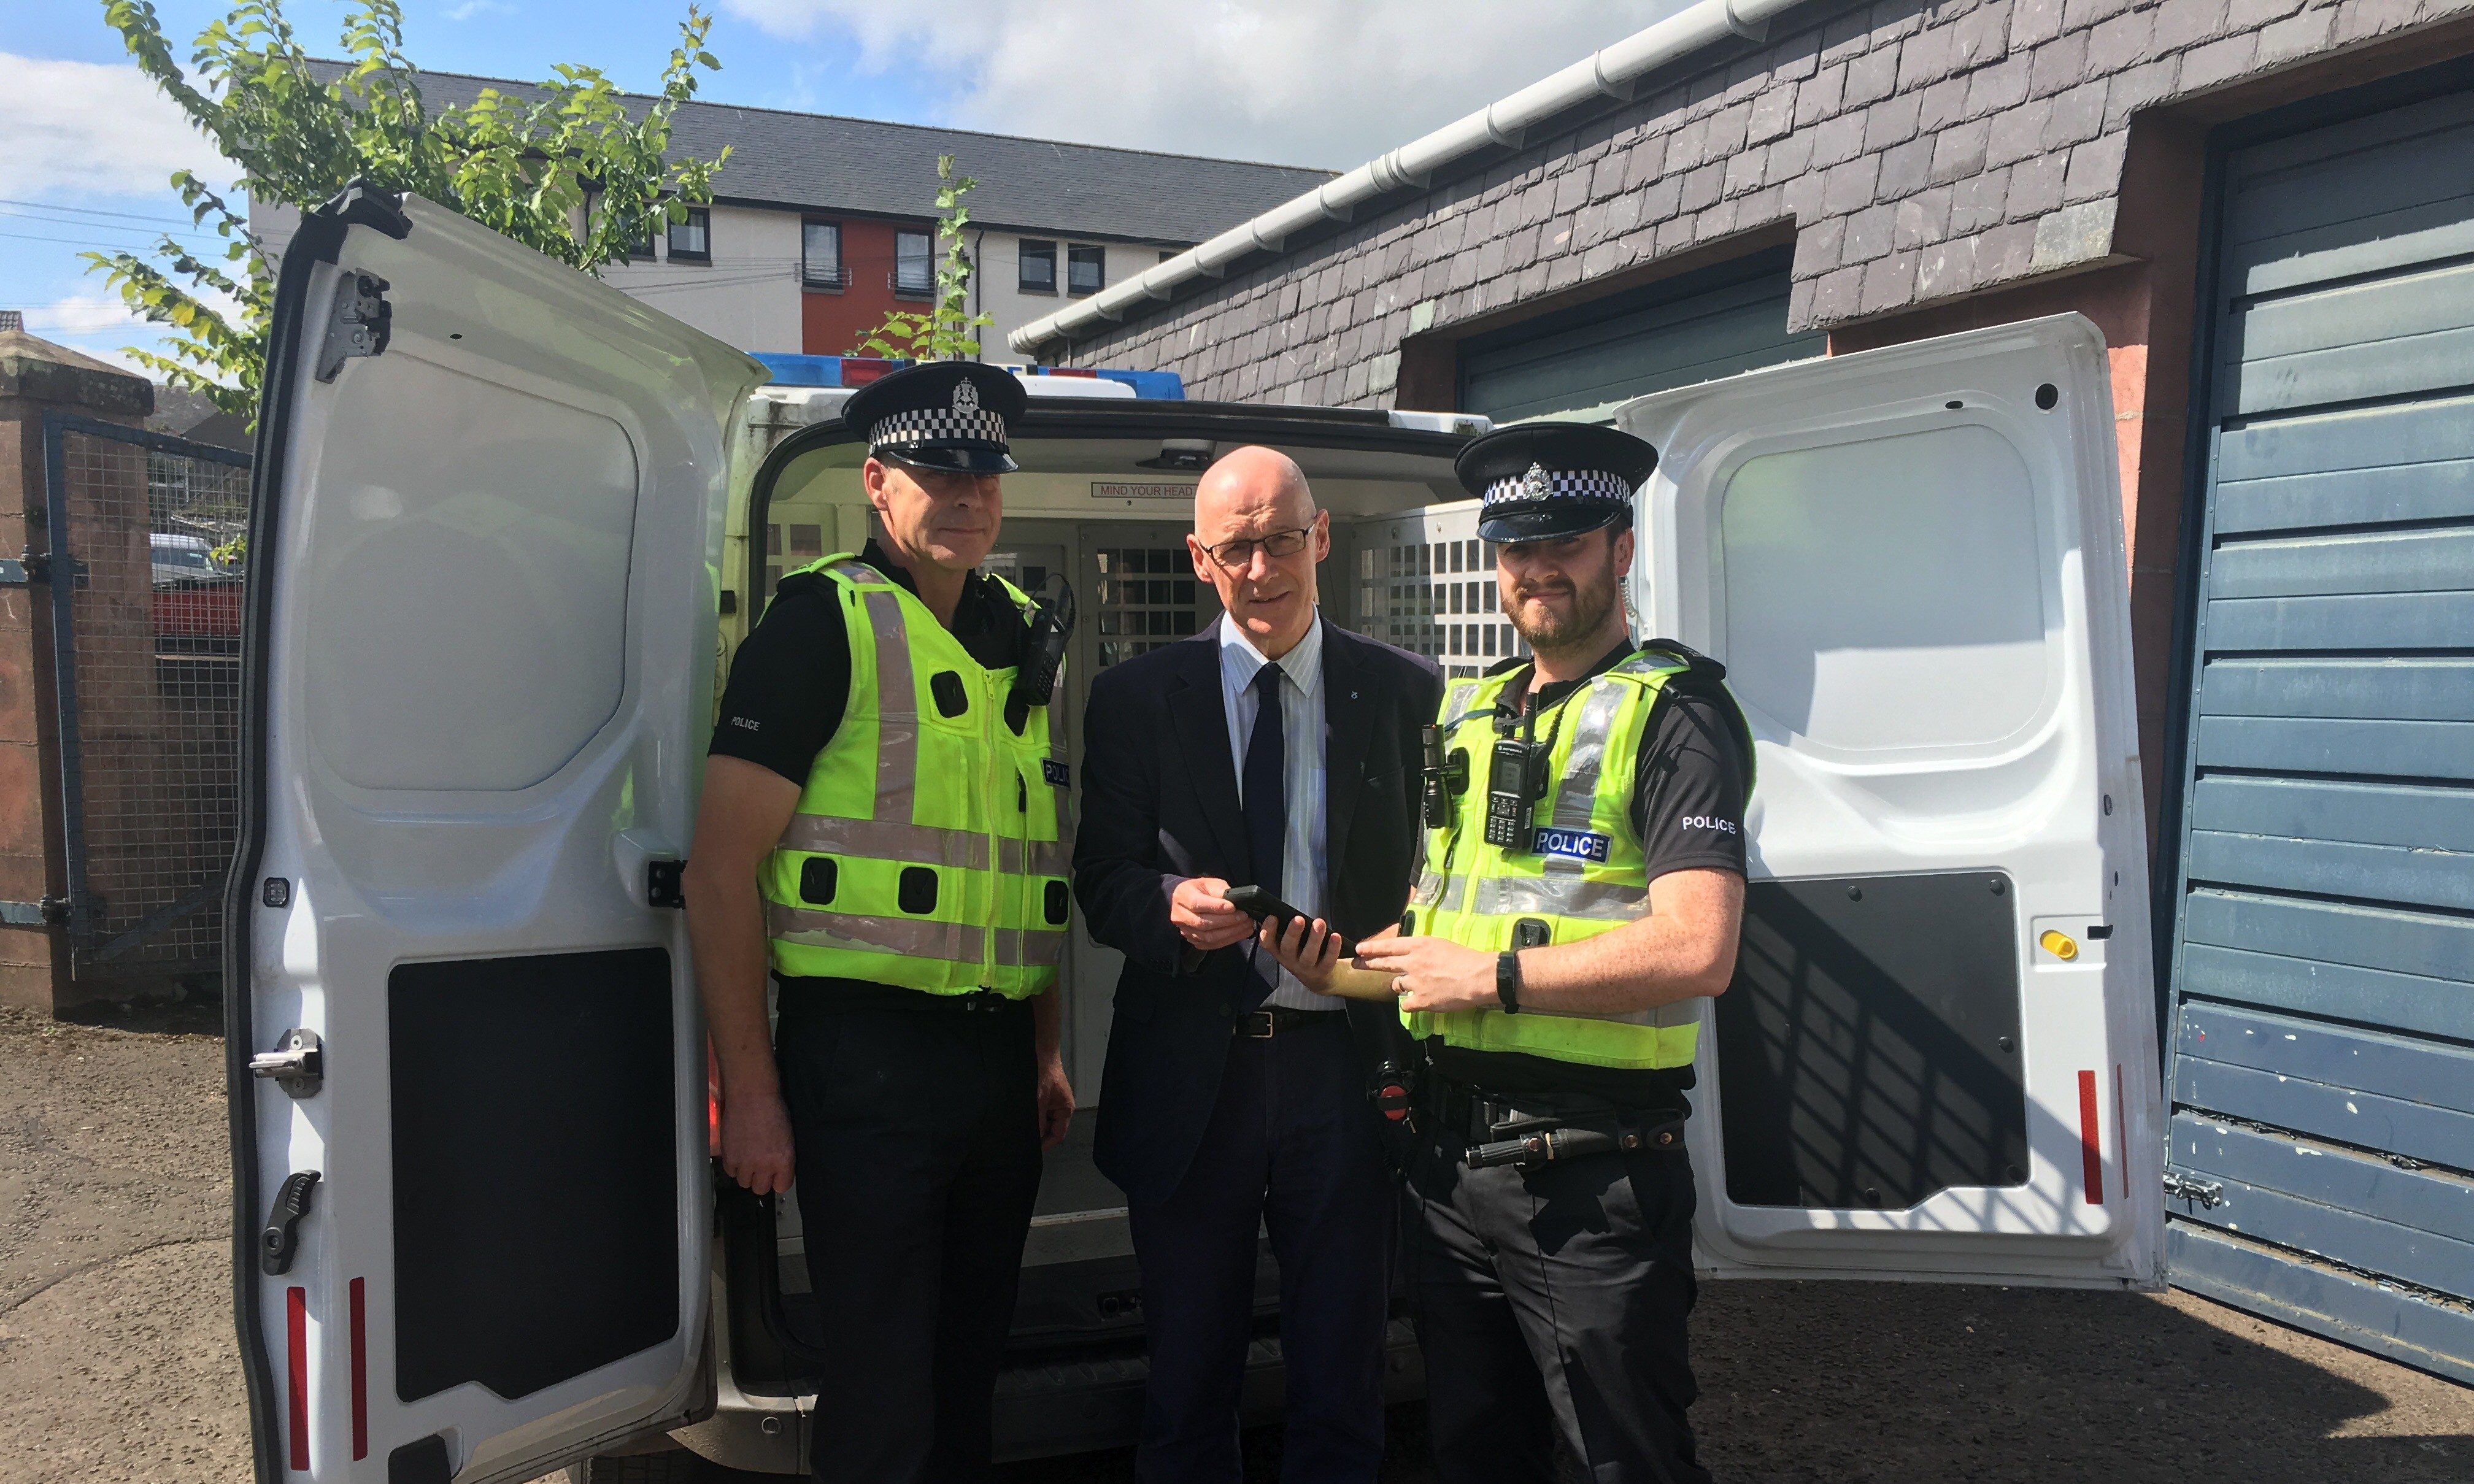 John Swinney MSP met with officers at Blairgowrie police station on Friday.